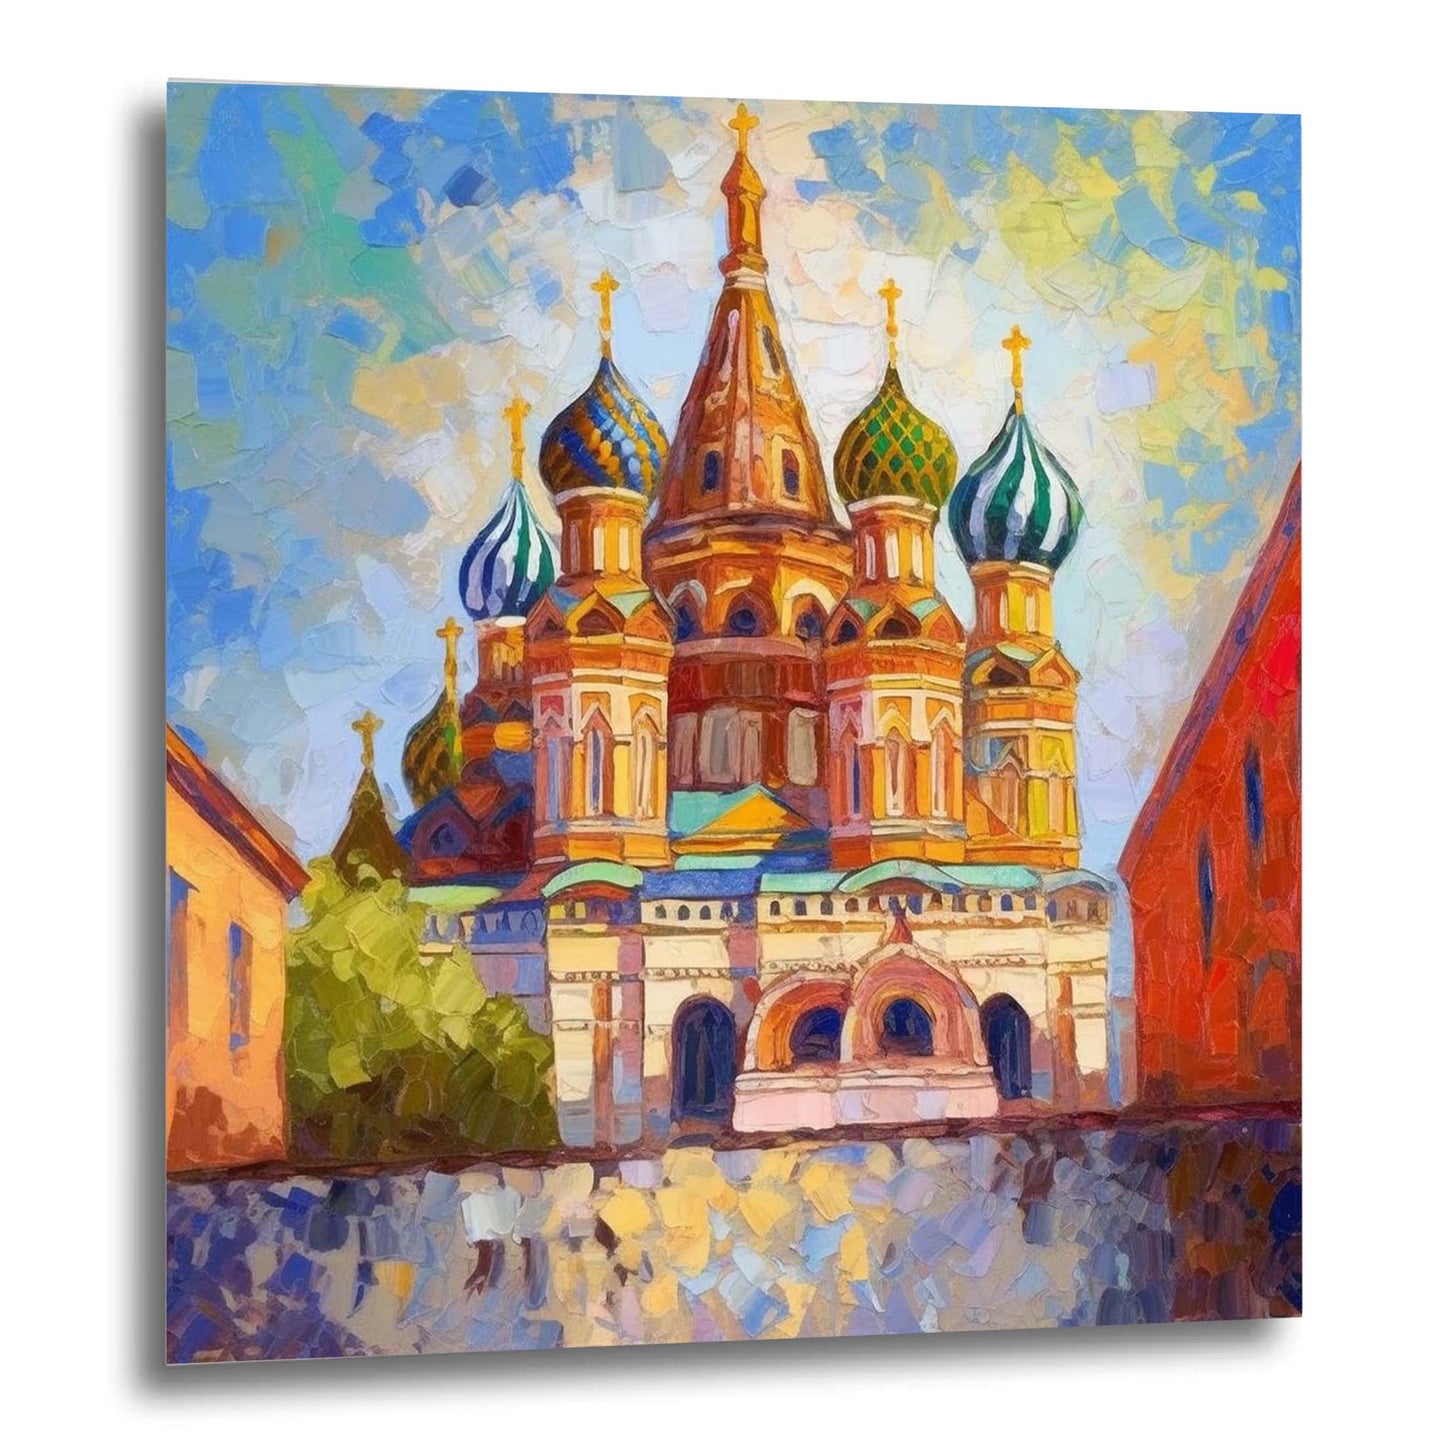 Moscow Kremlin - mural in the style of impressionism